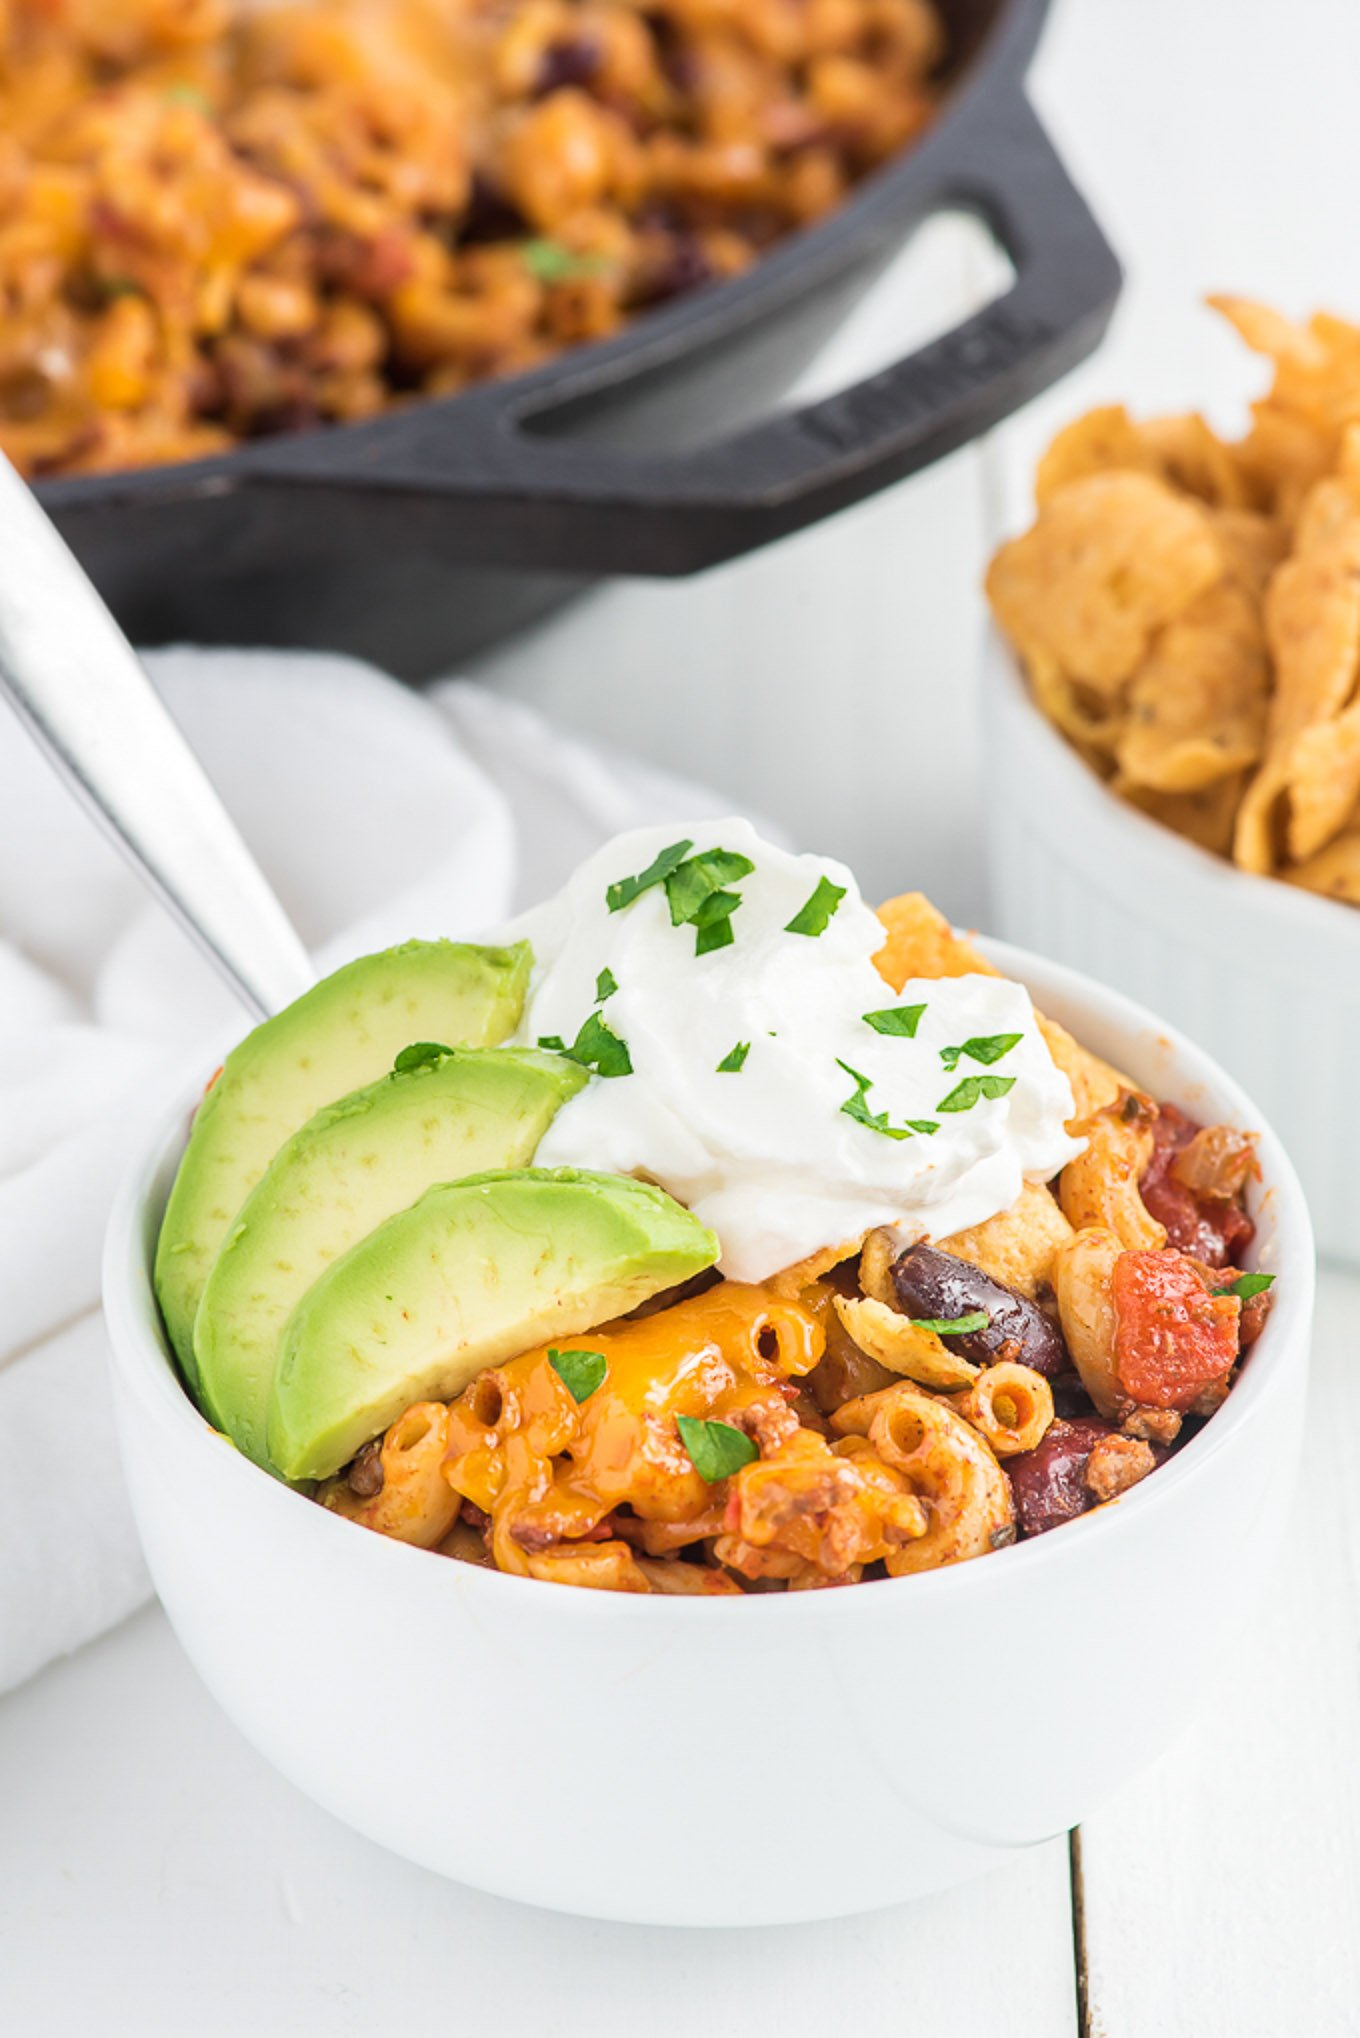 A bowl of chili mac on the table topped with sour cream and avocado with the skillet in the background.